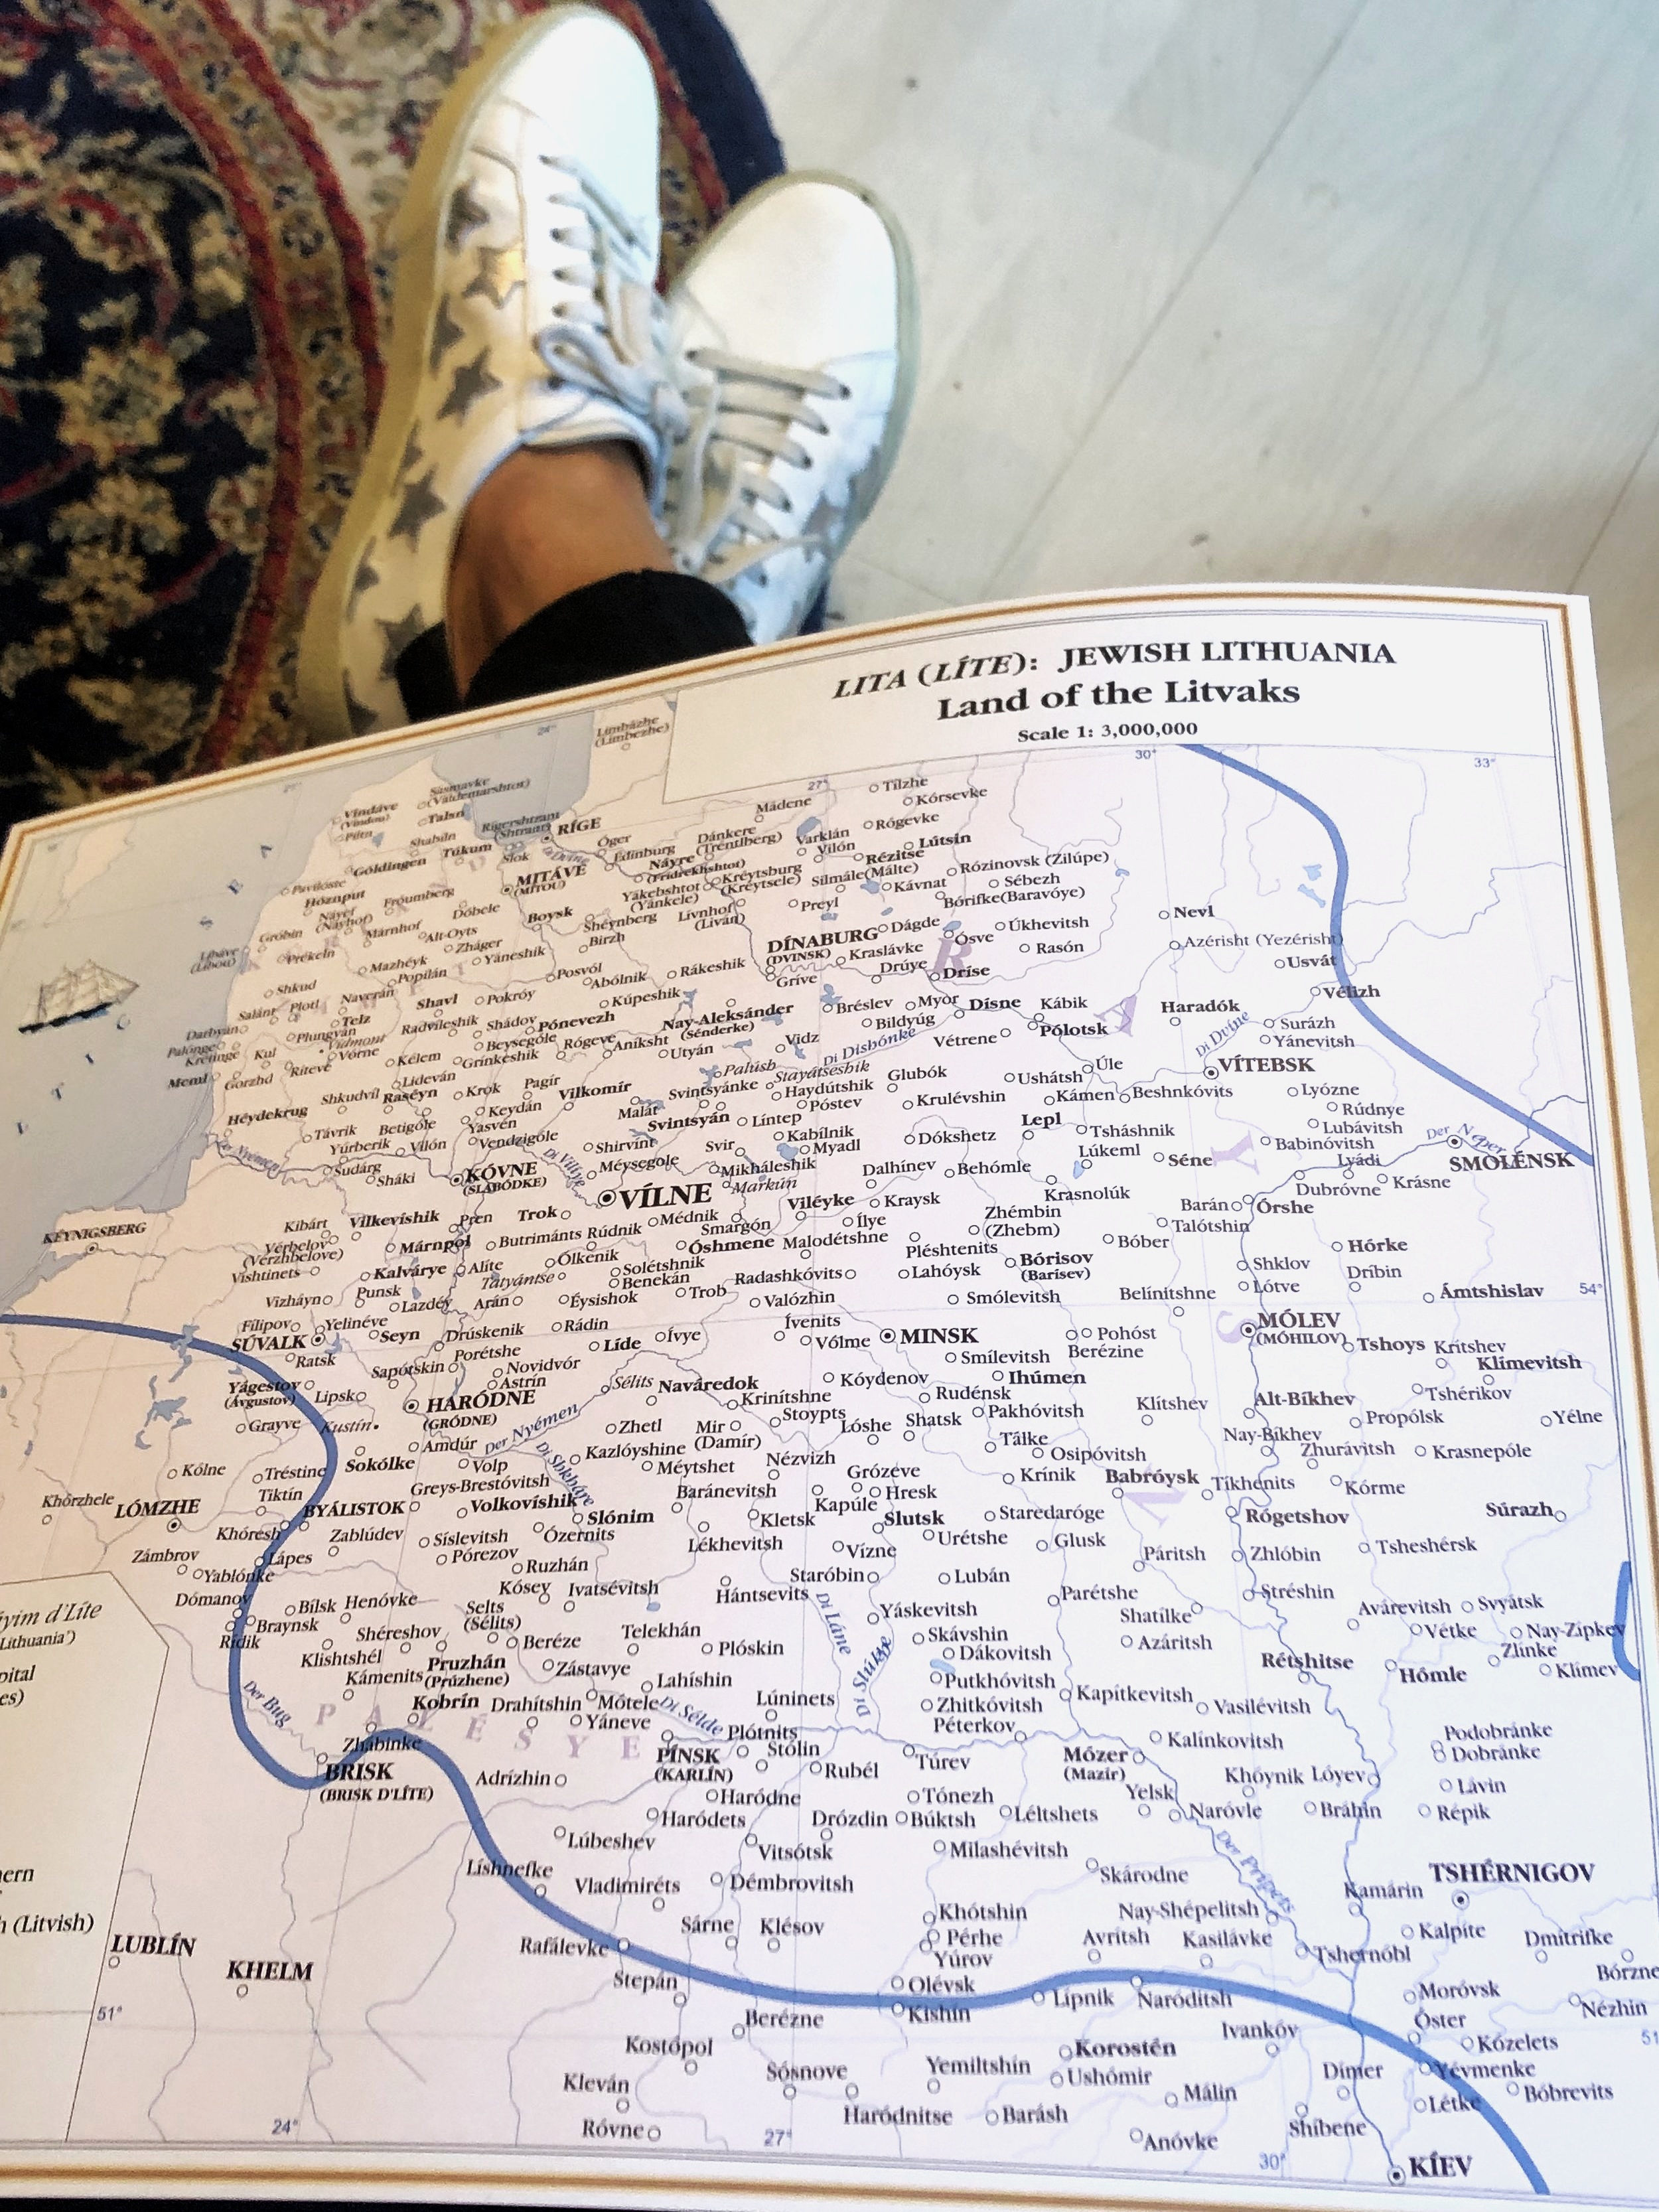 This is a map (with my fab sneakers peaking out) of where 70,000 Jewish people were tortured. 